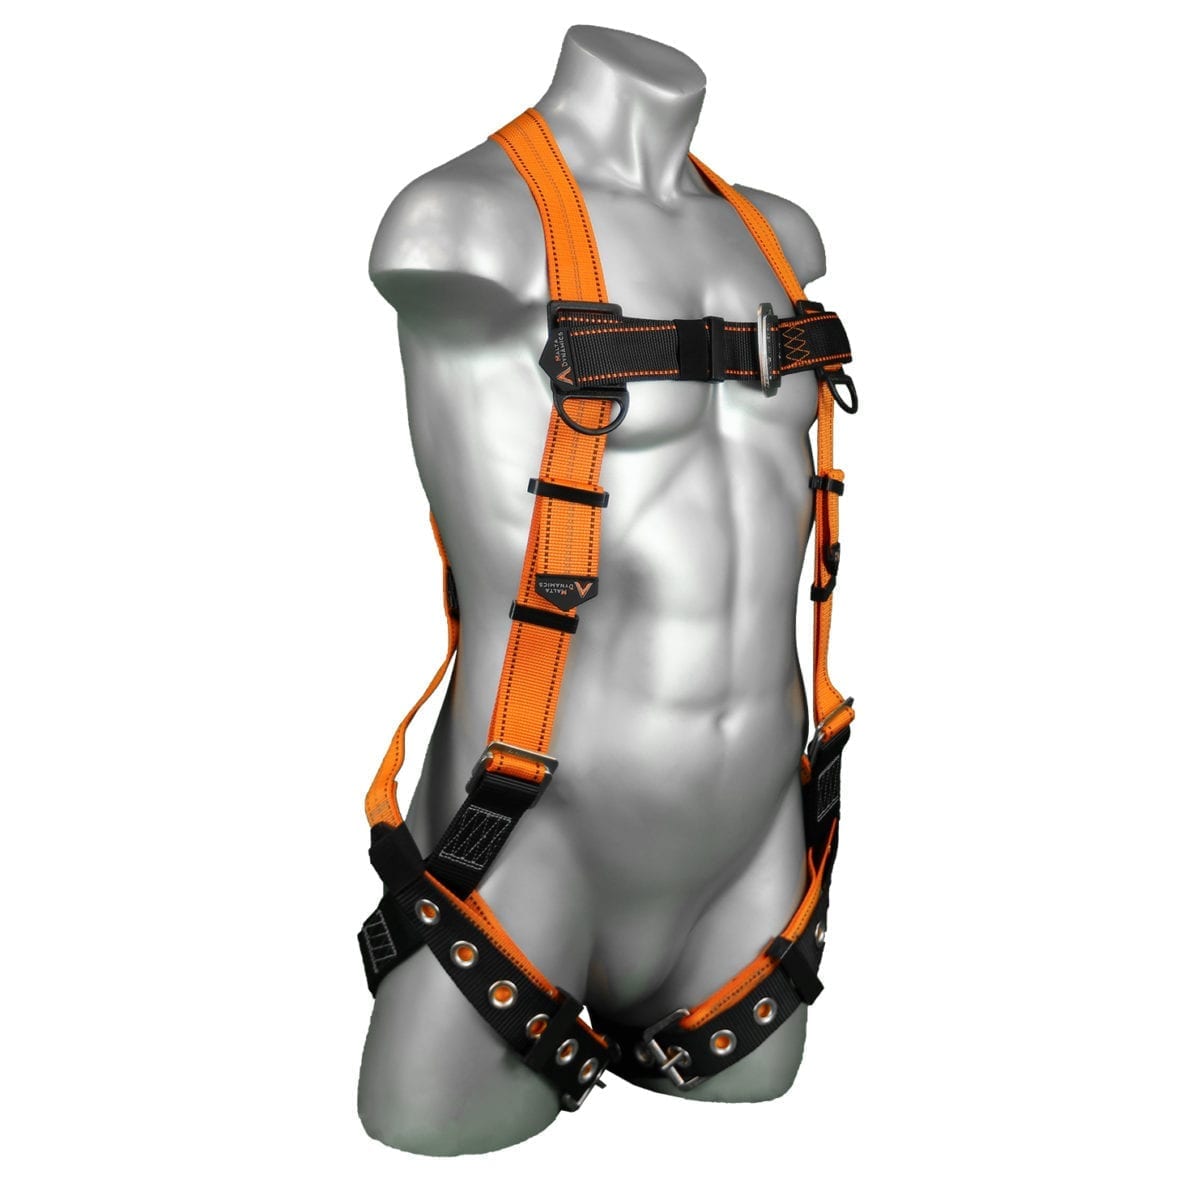 Fall Protection Harness Size Chart